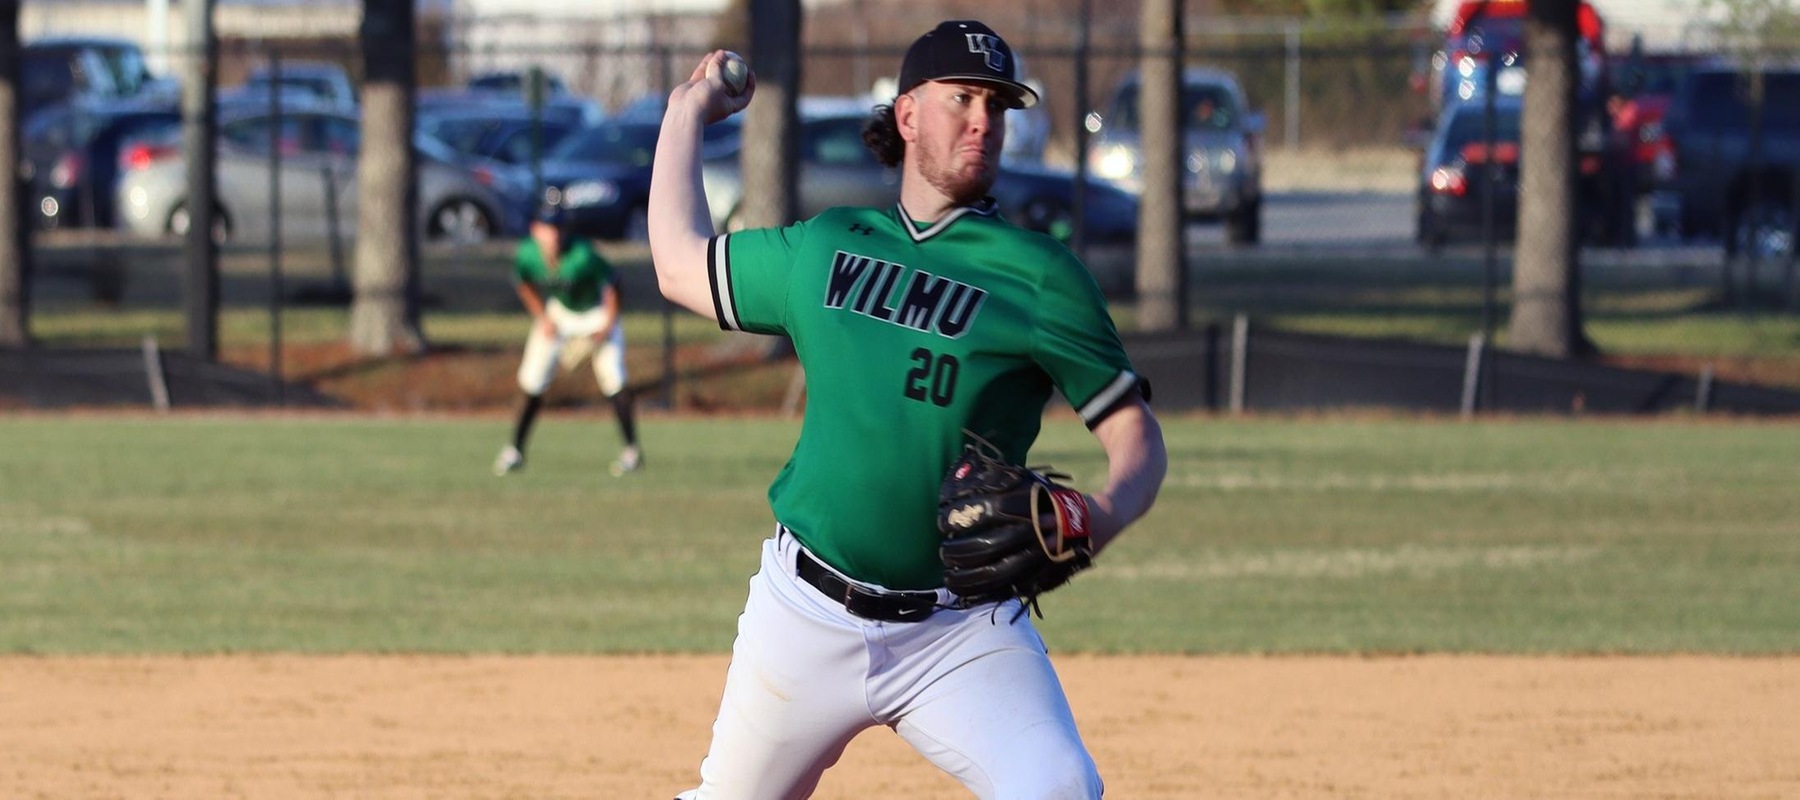 File photo of AJ Stento who threw a clean inning of relief against Millersville. Copyright 2022; Wilmington University. All rights reserved. Photo by Erin Harvey. March 15, 2022 vs. Shippensburg